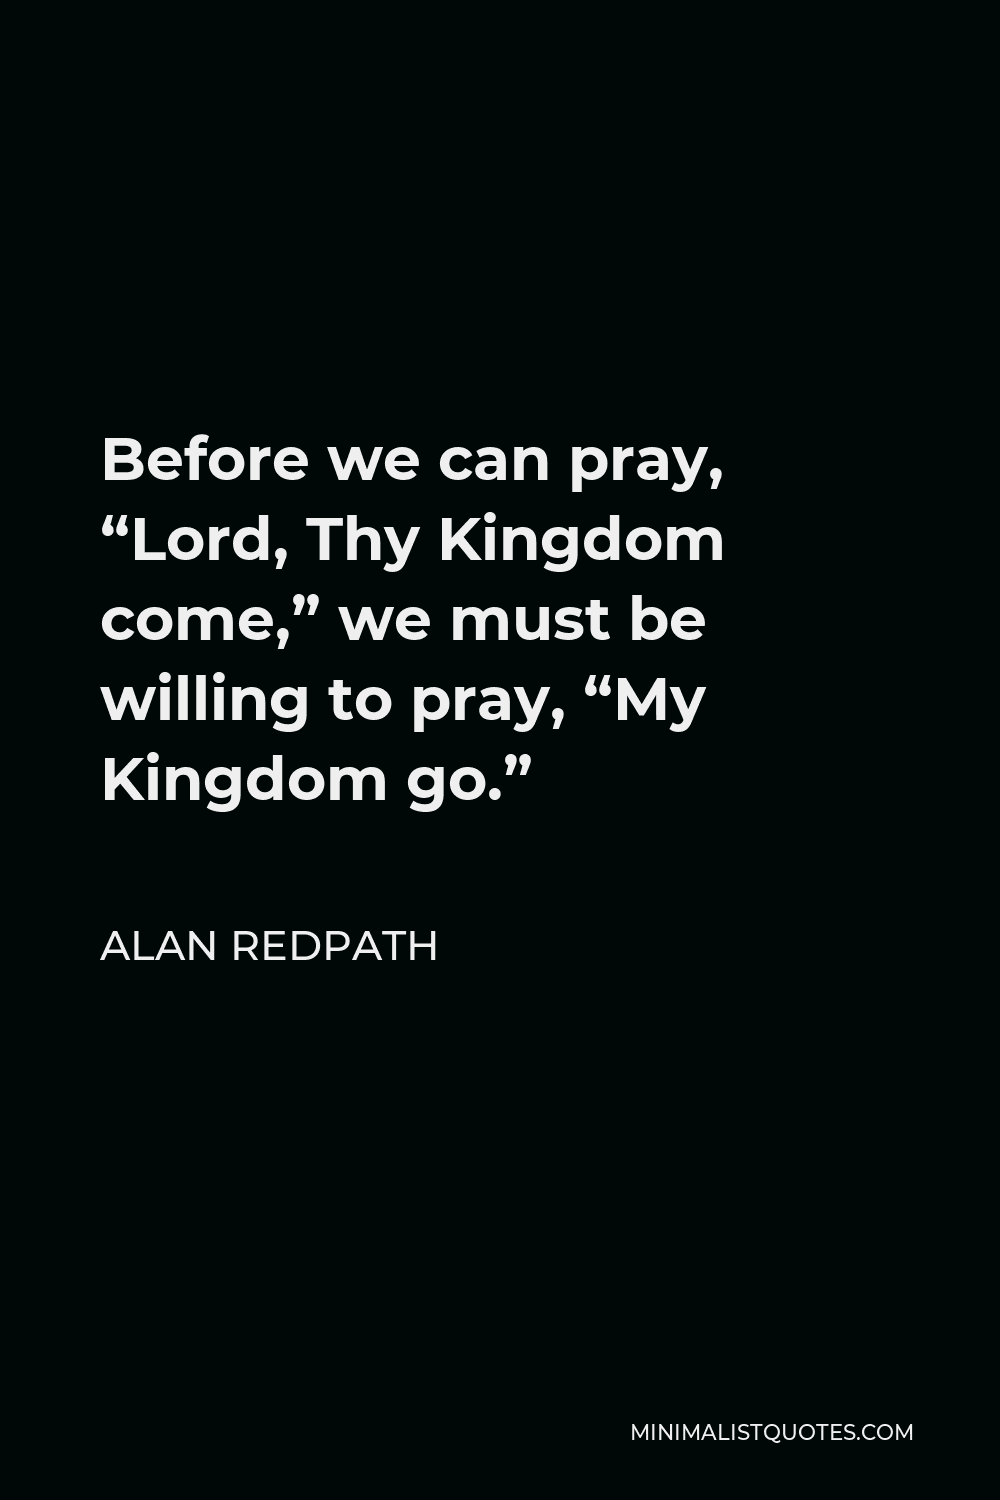 Alan Redpath Quote - Before we can pray, “Lord, Thy Kingdom come,” we must be willing to pray, “My Kingdom go.”